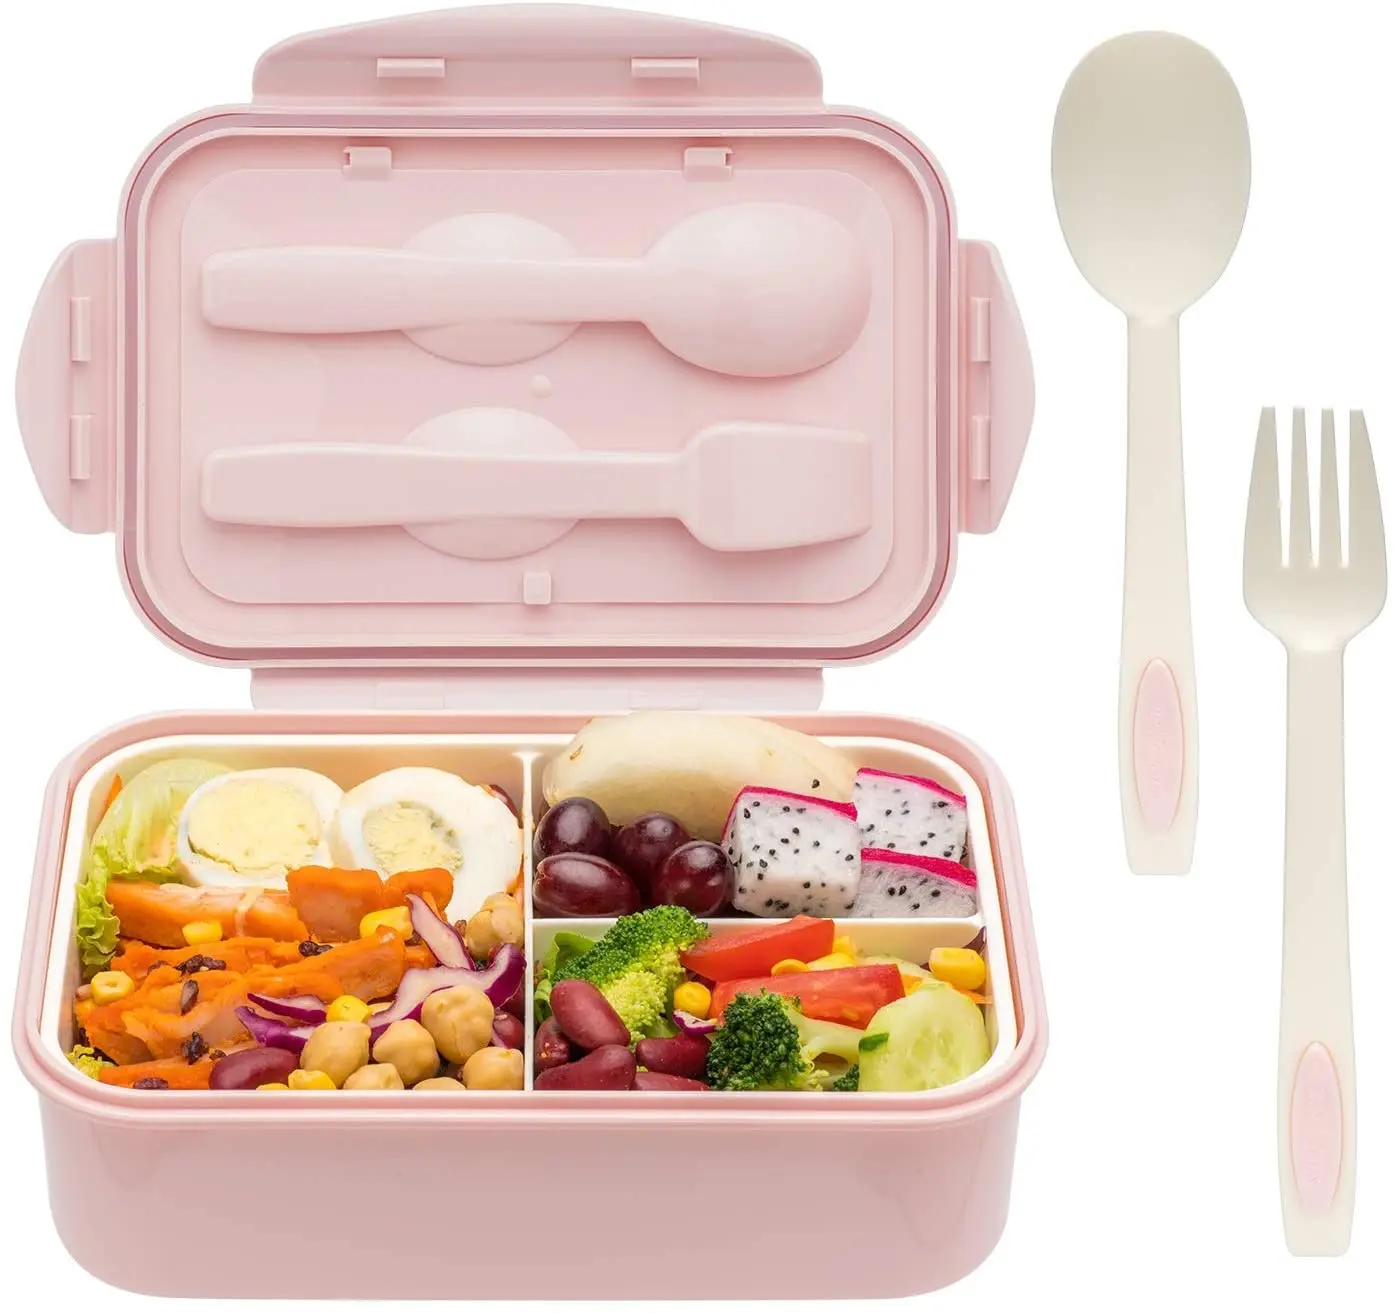 

Factory Wholesale Food Microwave Compartment Plastic Bento Lunch Box For Kids Leakproof Lunchbox, Pink/green/beige